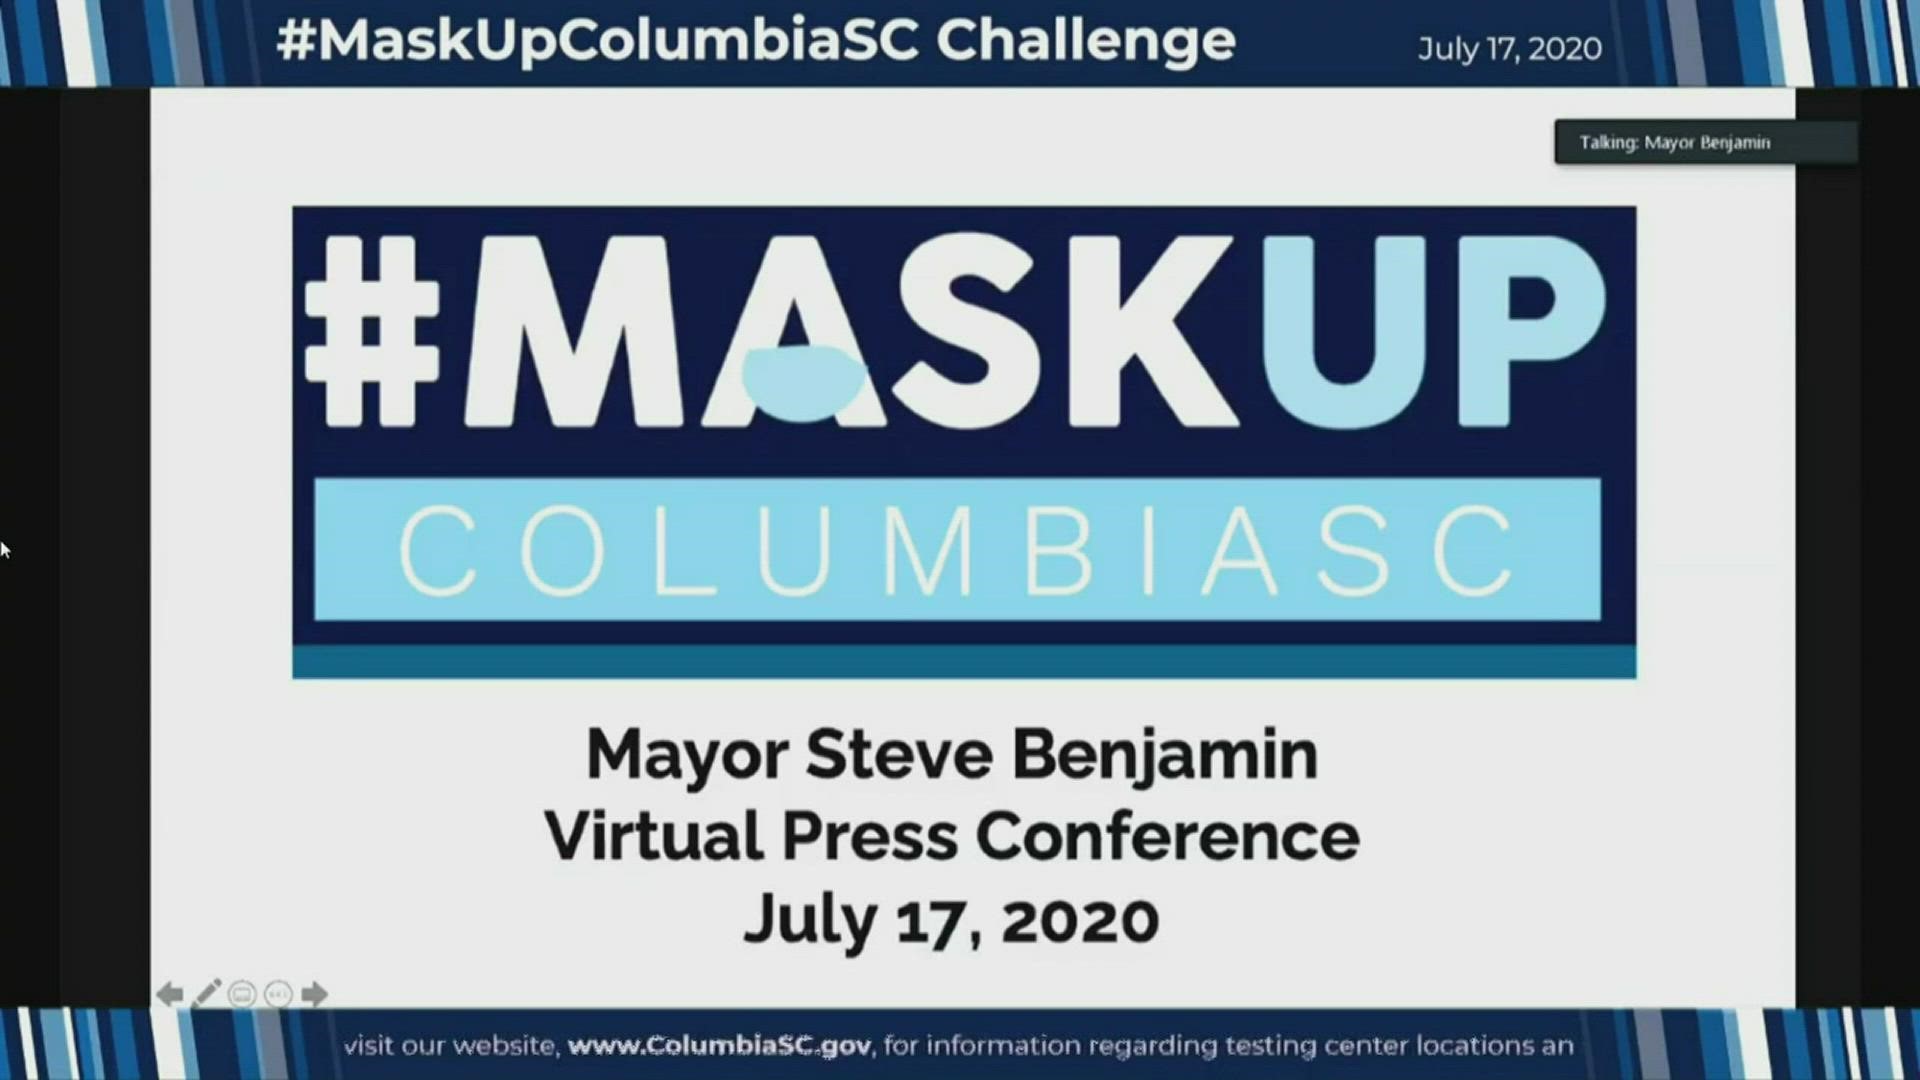 Columbia Mayor Steve Benjamin announced the "Mask Up Columbia SC challenge" to get people to wear masks to stop the spread of the coronavirus.